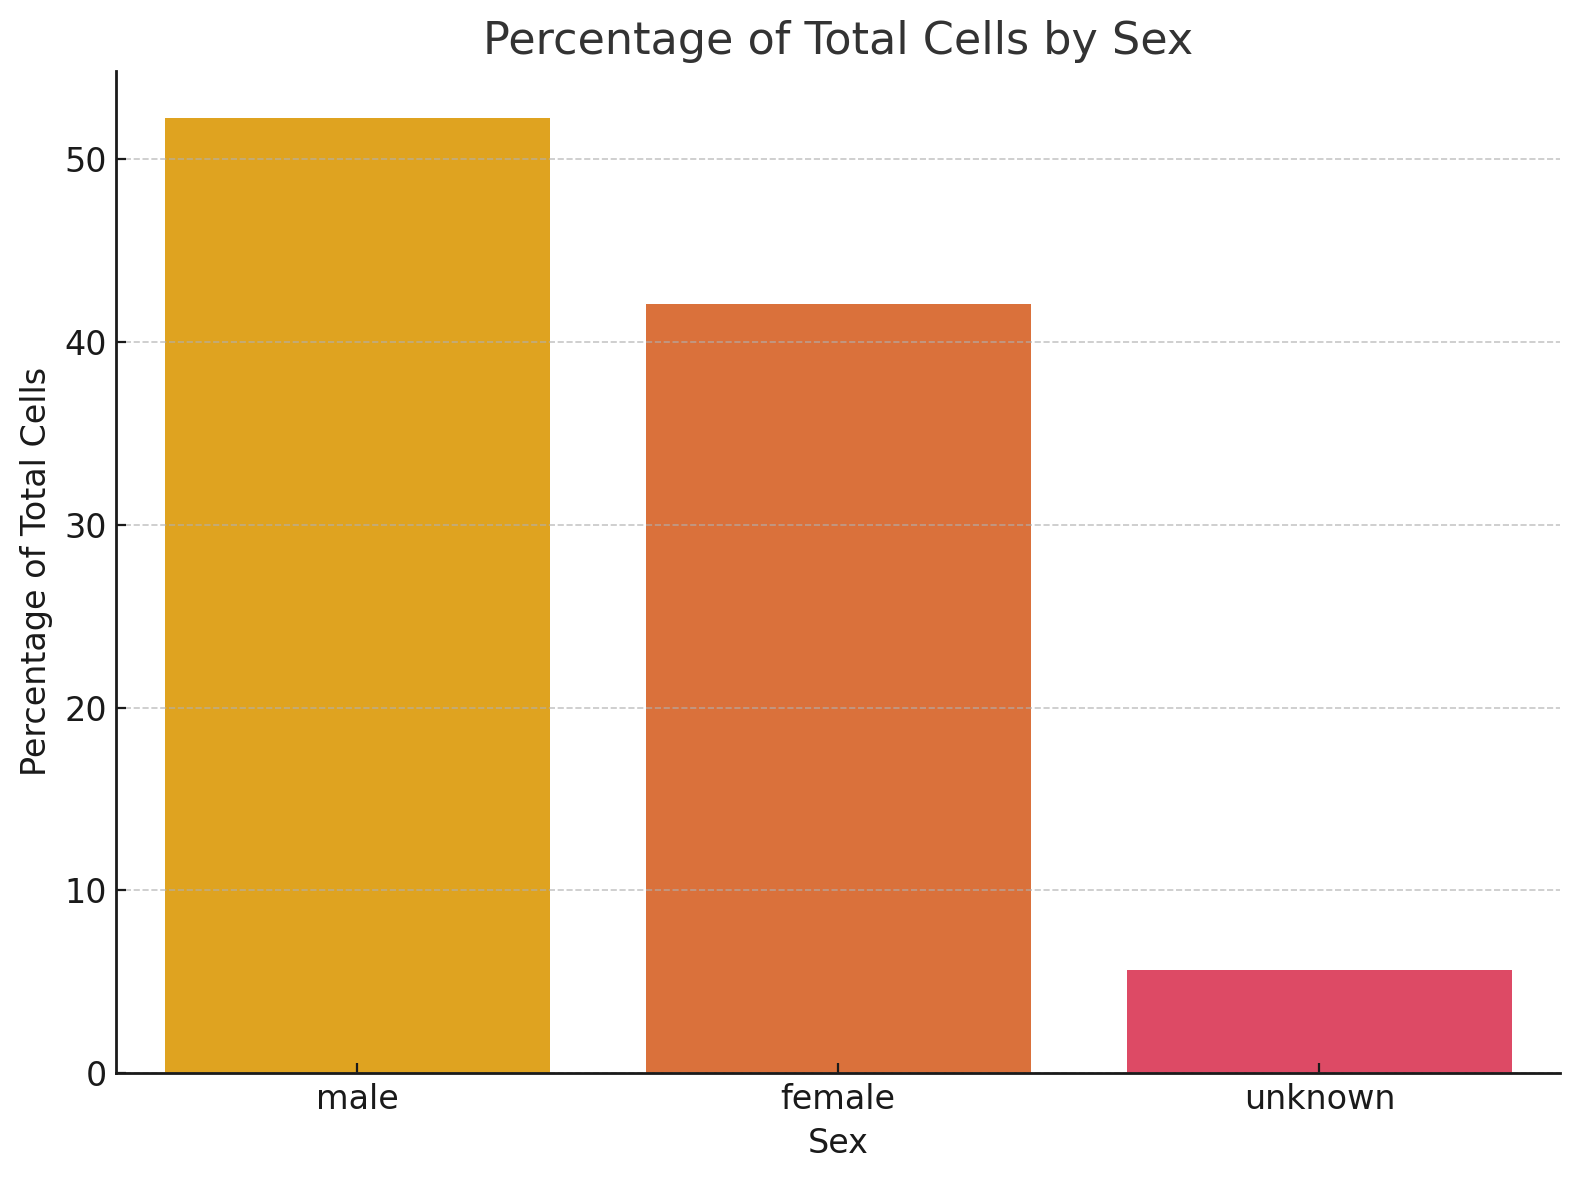 Percentage of cells by donor sex